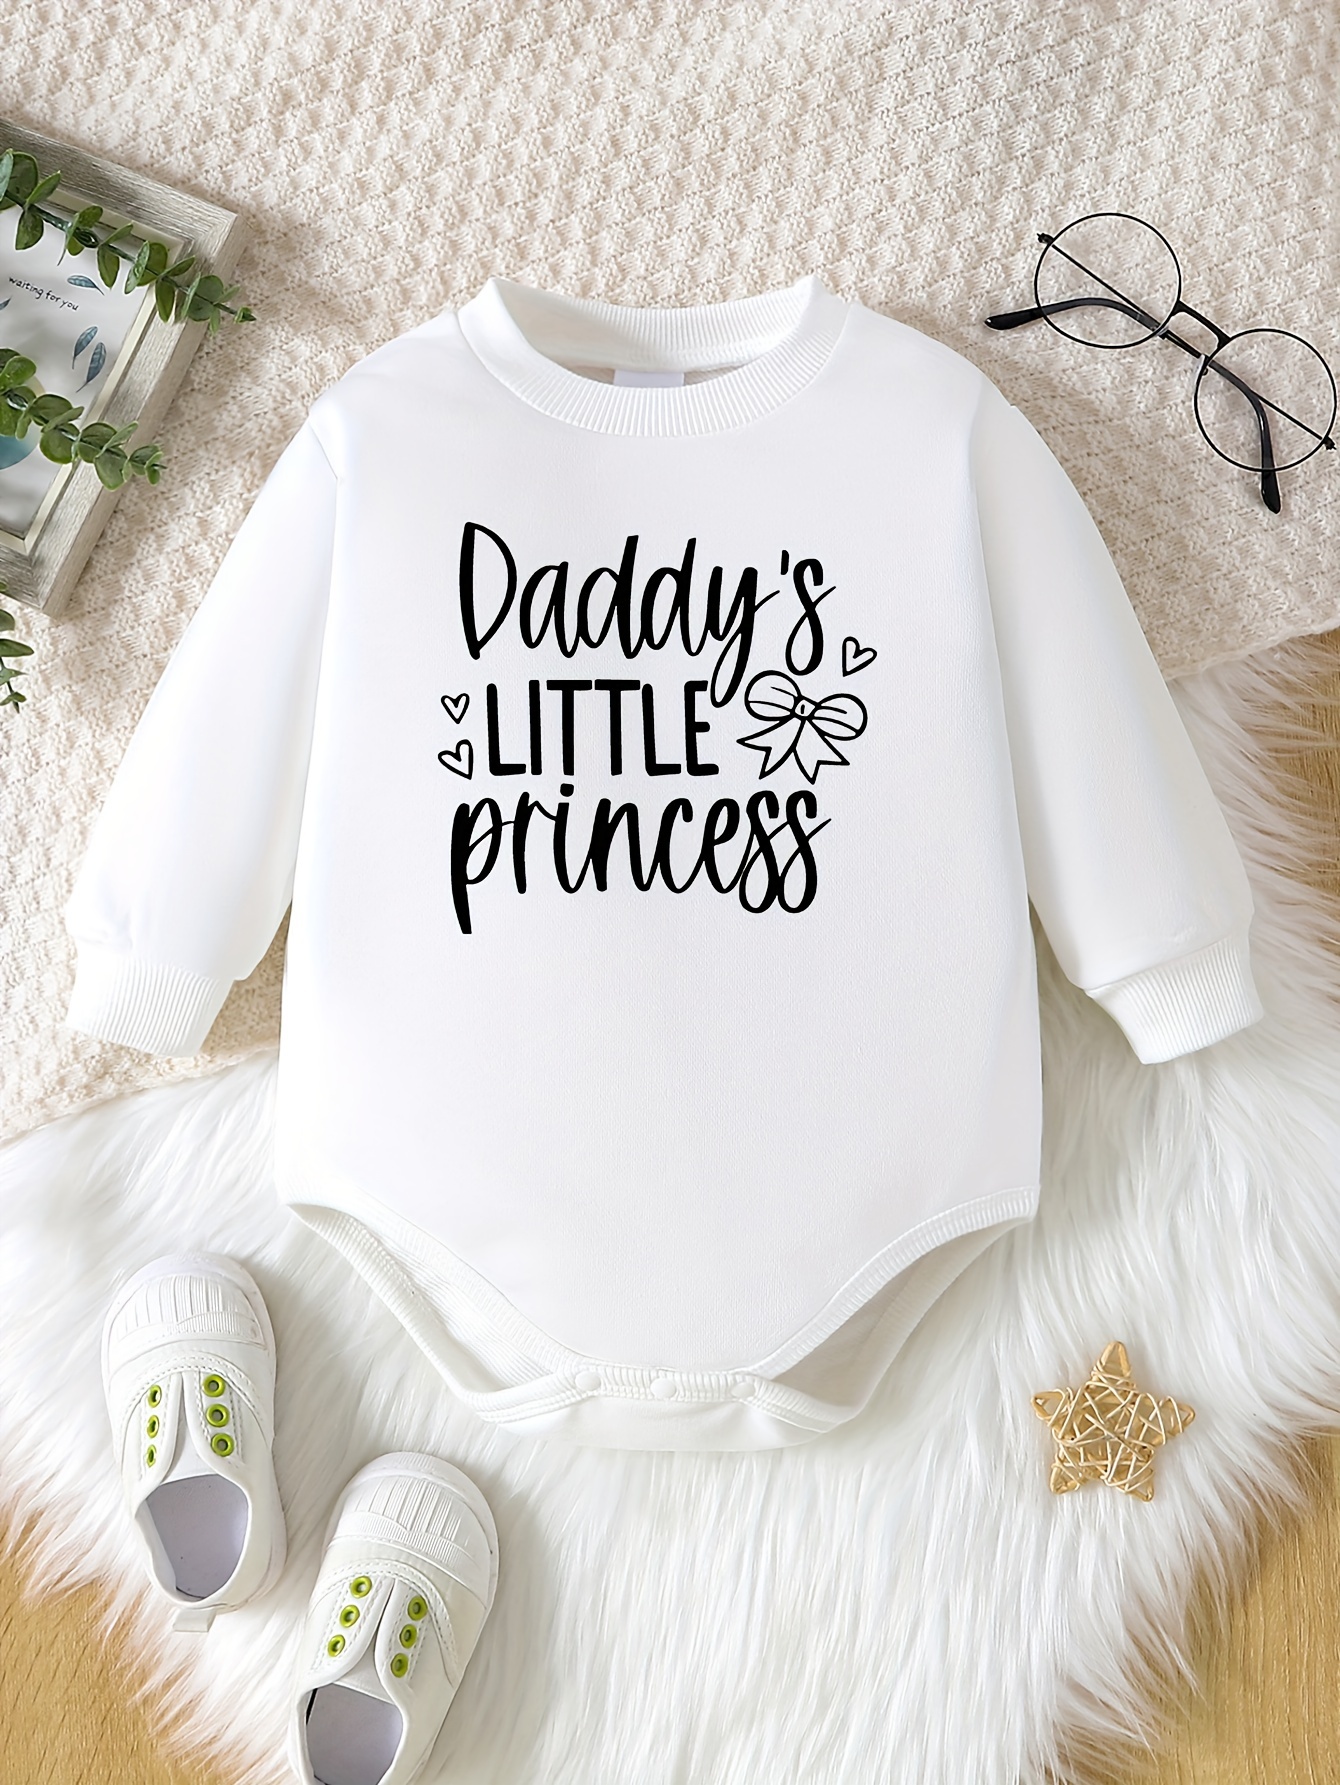 Newborn Princess Baby Clothing and Accessories for Infant Girl